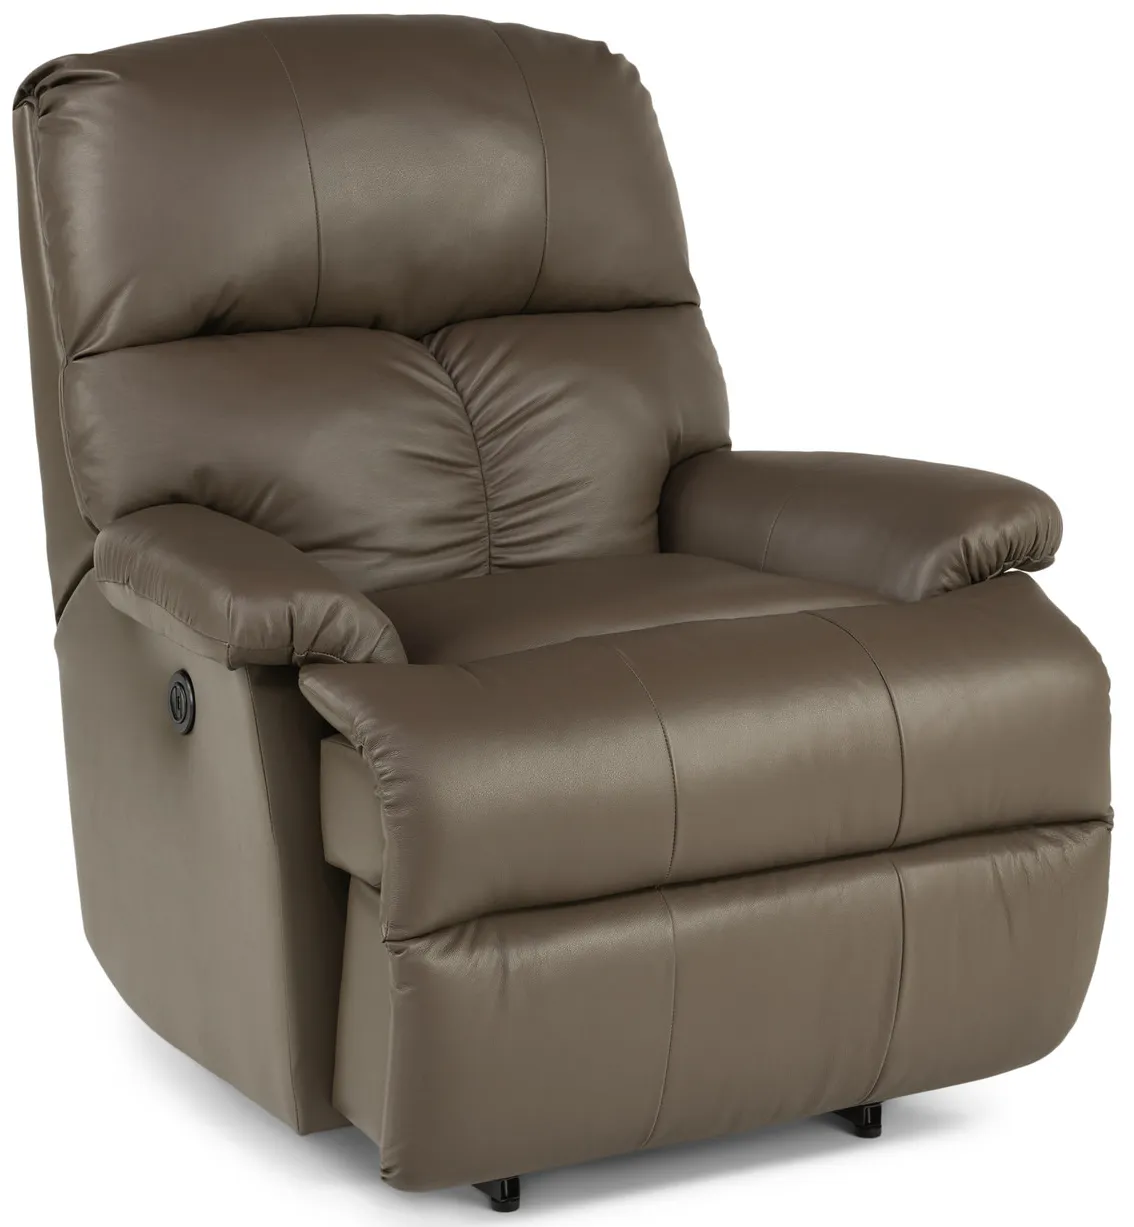 Triton Leather Power Recliner